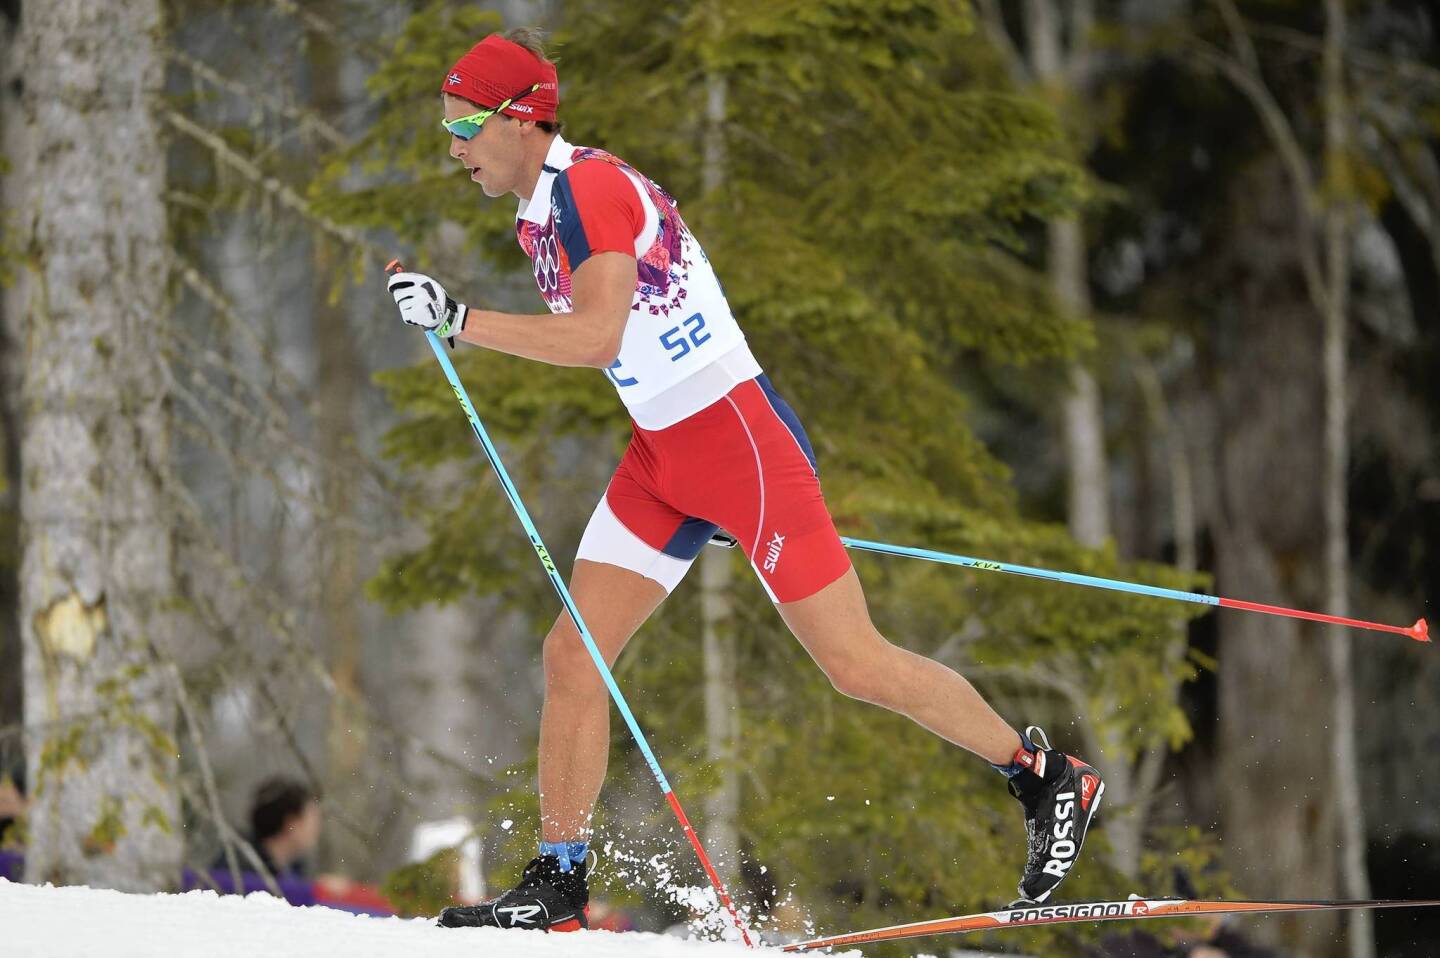 Norway's Chris Andre Jespersen competes in the men's cross-country skiing 15km classic at the Laura Cross-Country Ski and Biathlon Center.